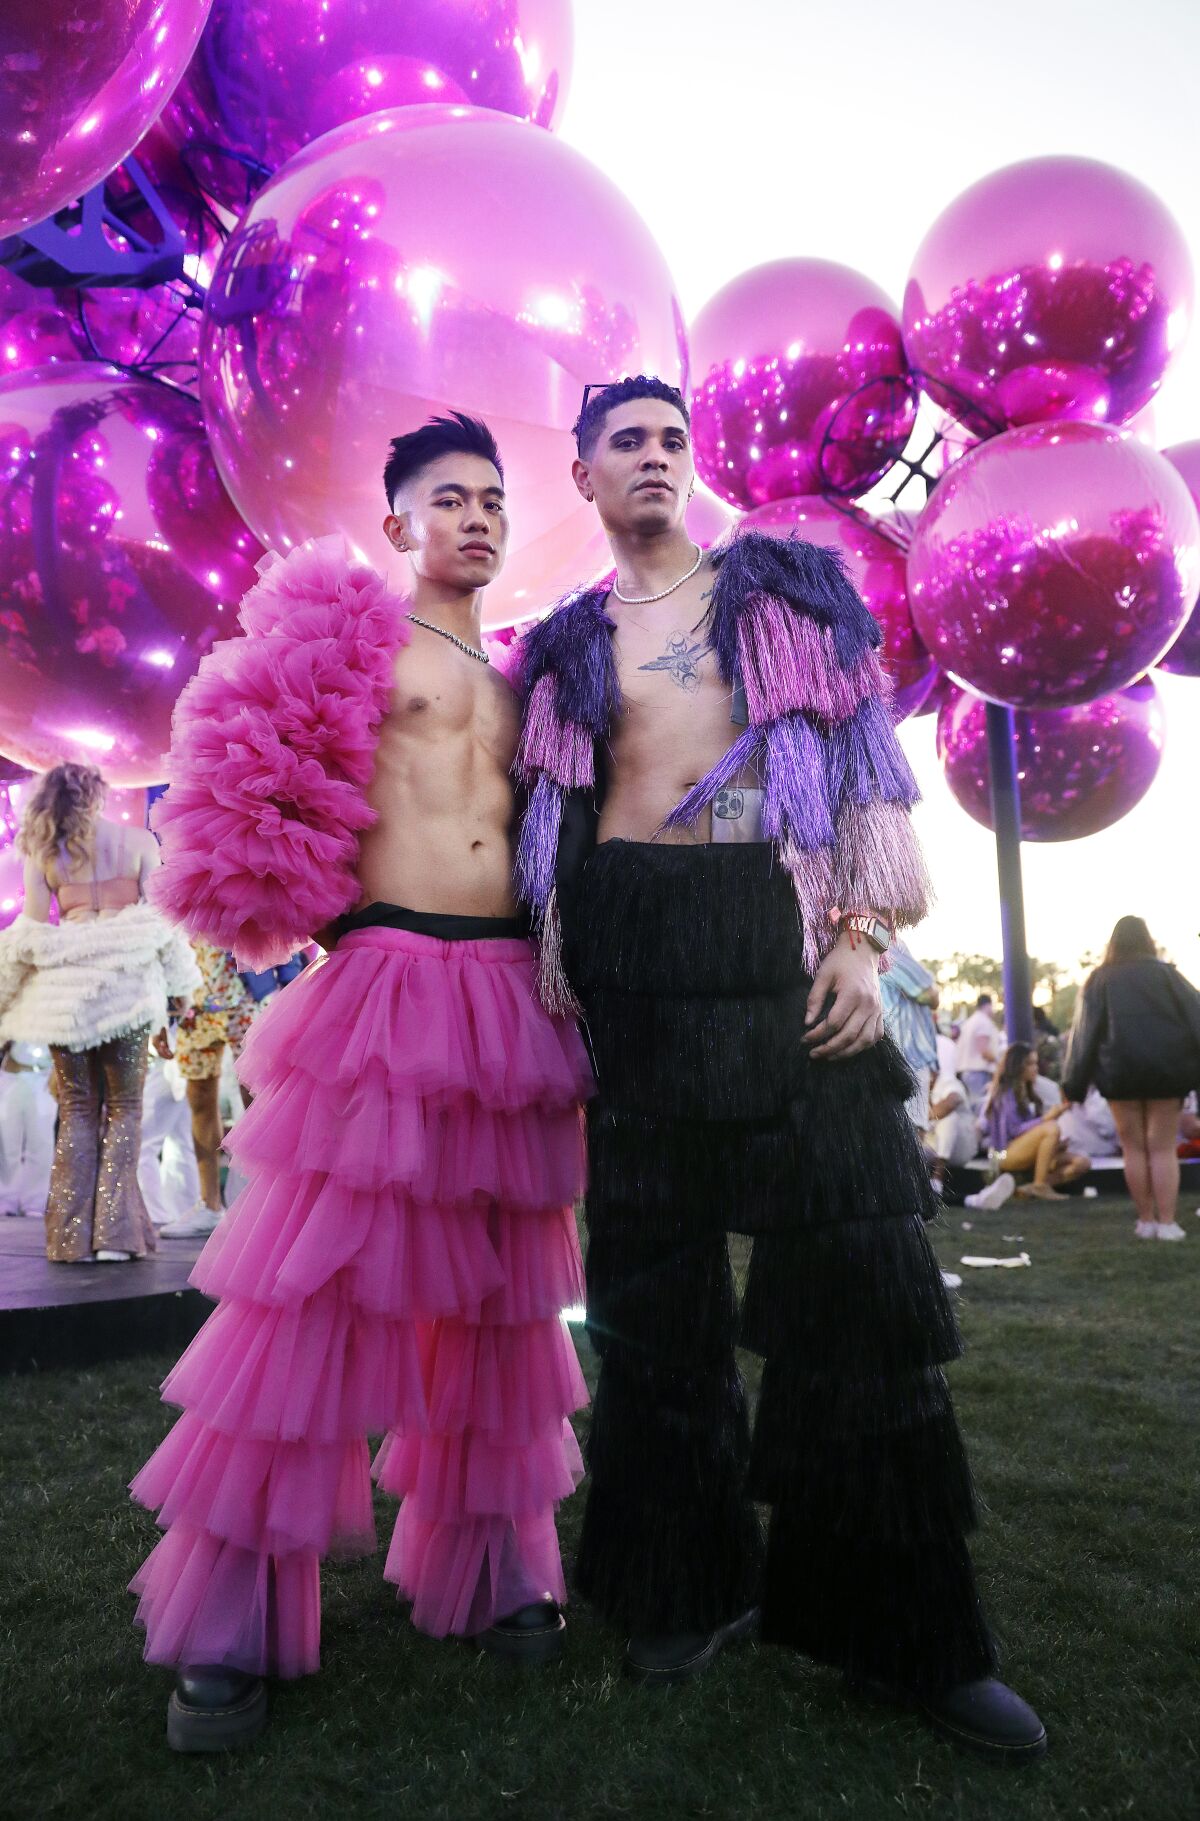 Two people pose for a fashion portrait in front of a sculpture of pink globes 